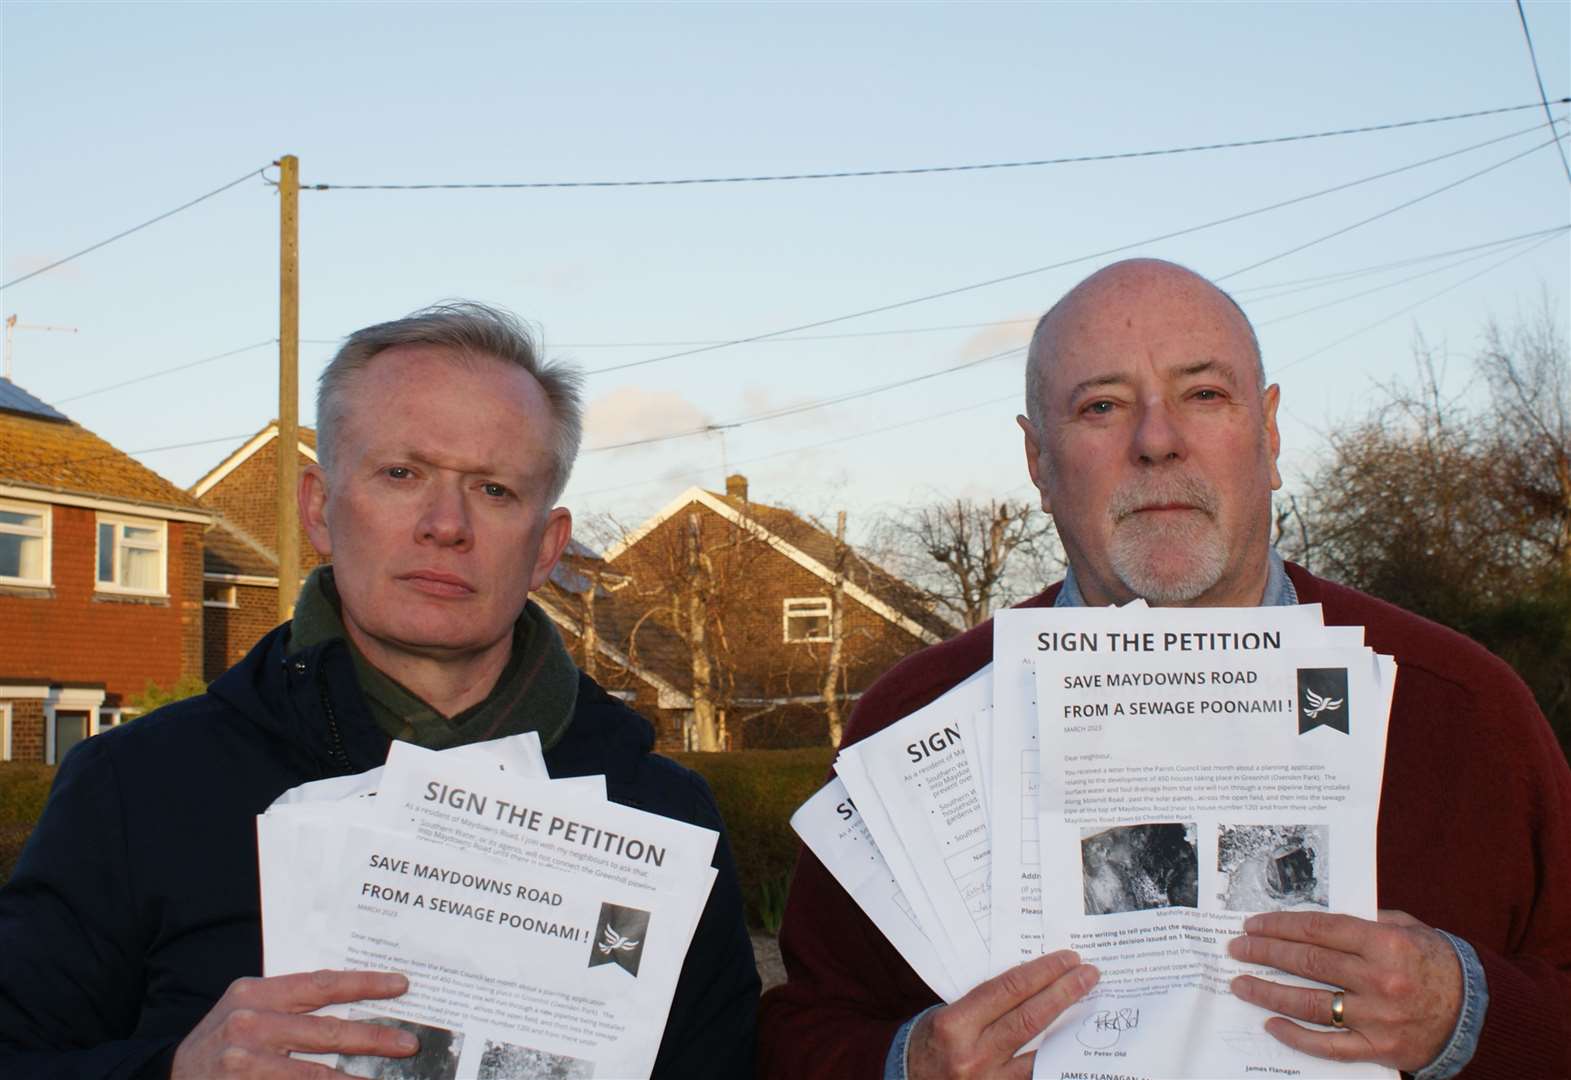 James Flanagan and Dr Peter Old have been campaigning to stop the works. Photo: James Flanagan